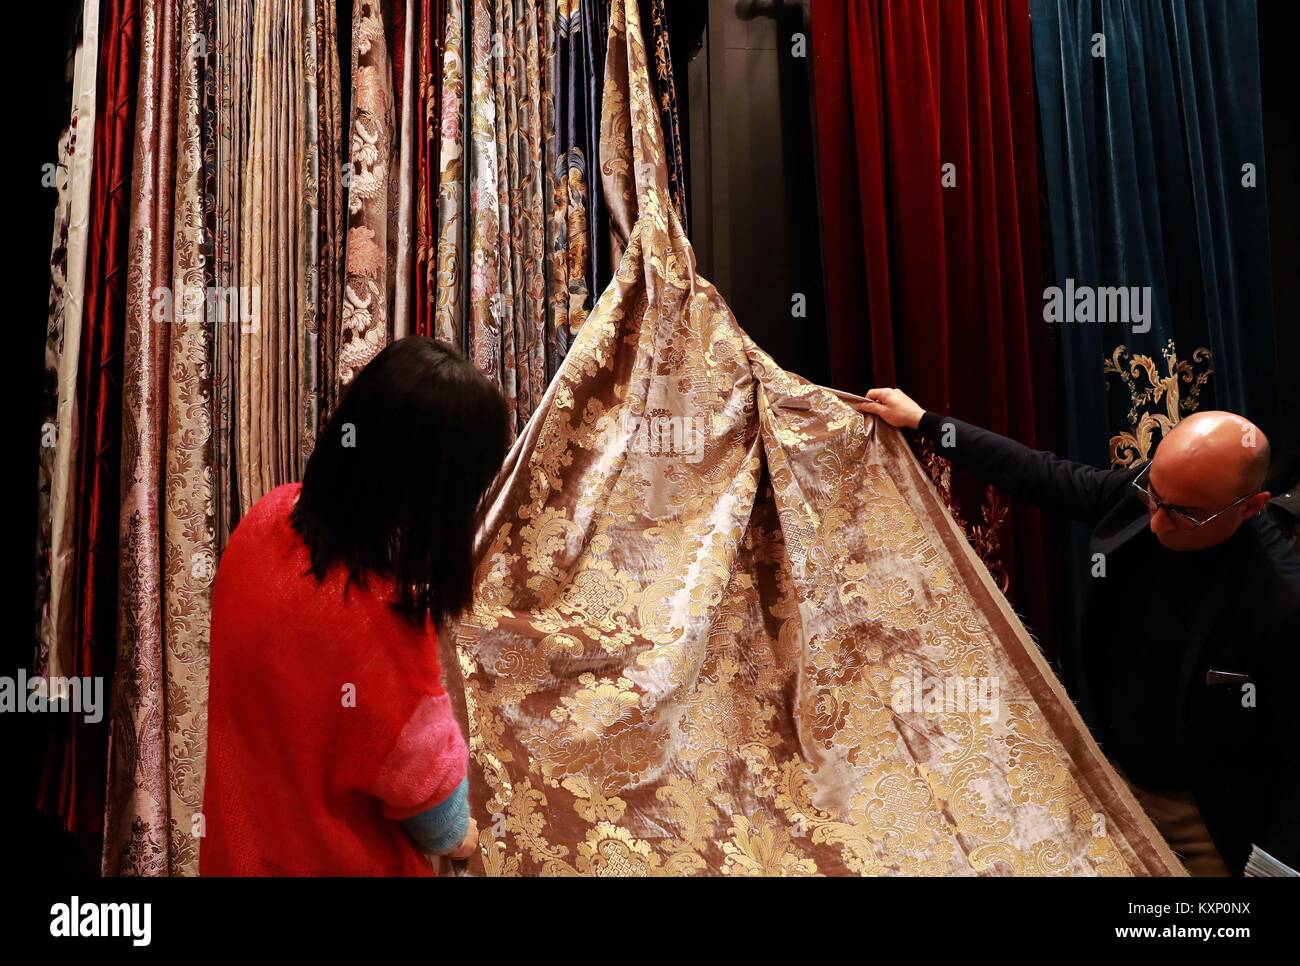 Frankfurt, Germany. 11th Jan, 2018. A Chinese exhibitor talks with a visitor at a Chinese textile booth at Heimtextil, the world's largest international trade fair for home and contract textiles, in Frankfurt, Germany, on Jan. 11, 2018. A total of 2,975 exhibitors from 64 countries and regions attended the trade fair this year, 545 of which are from China. Credit: Luo Huanhuan/Xinhua/Alamy Live News Stock Photo